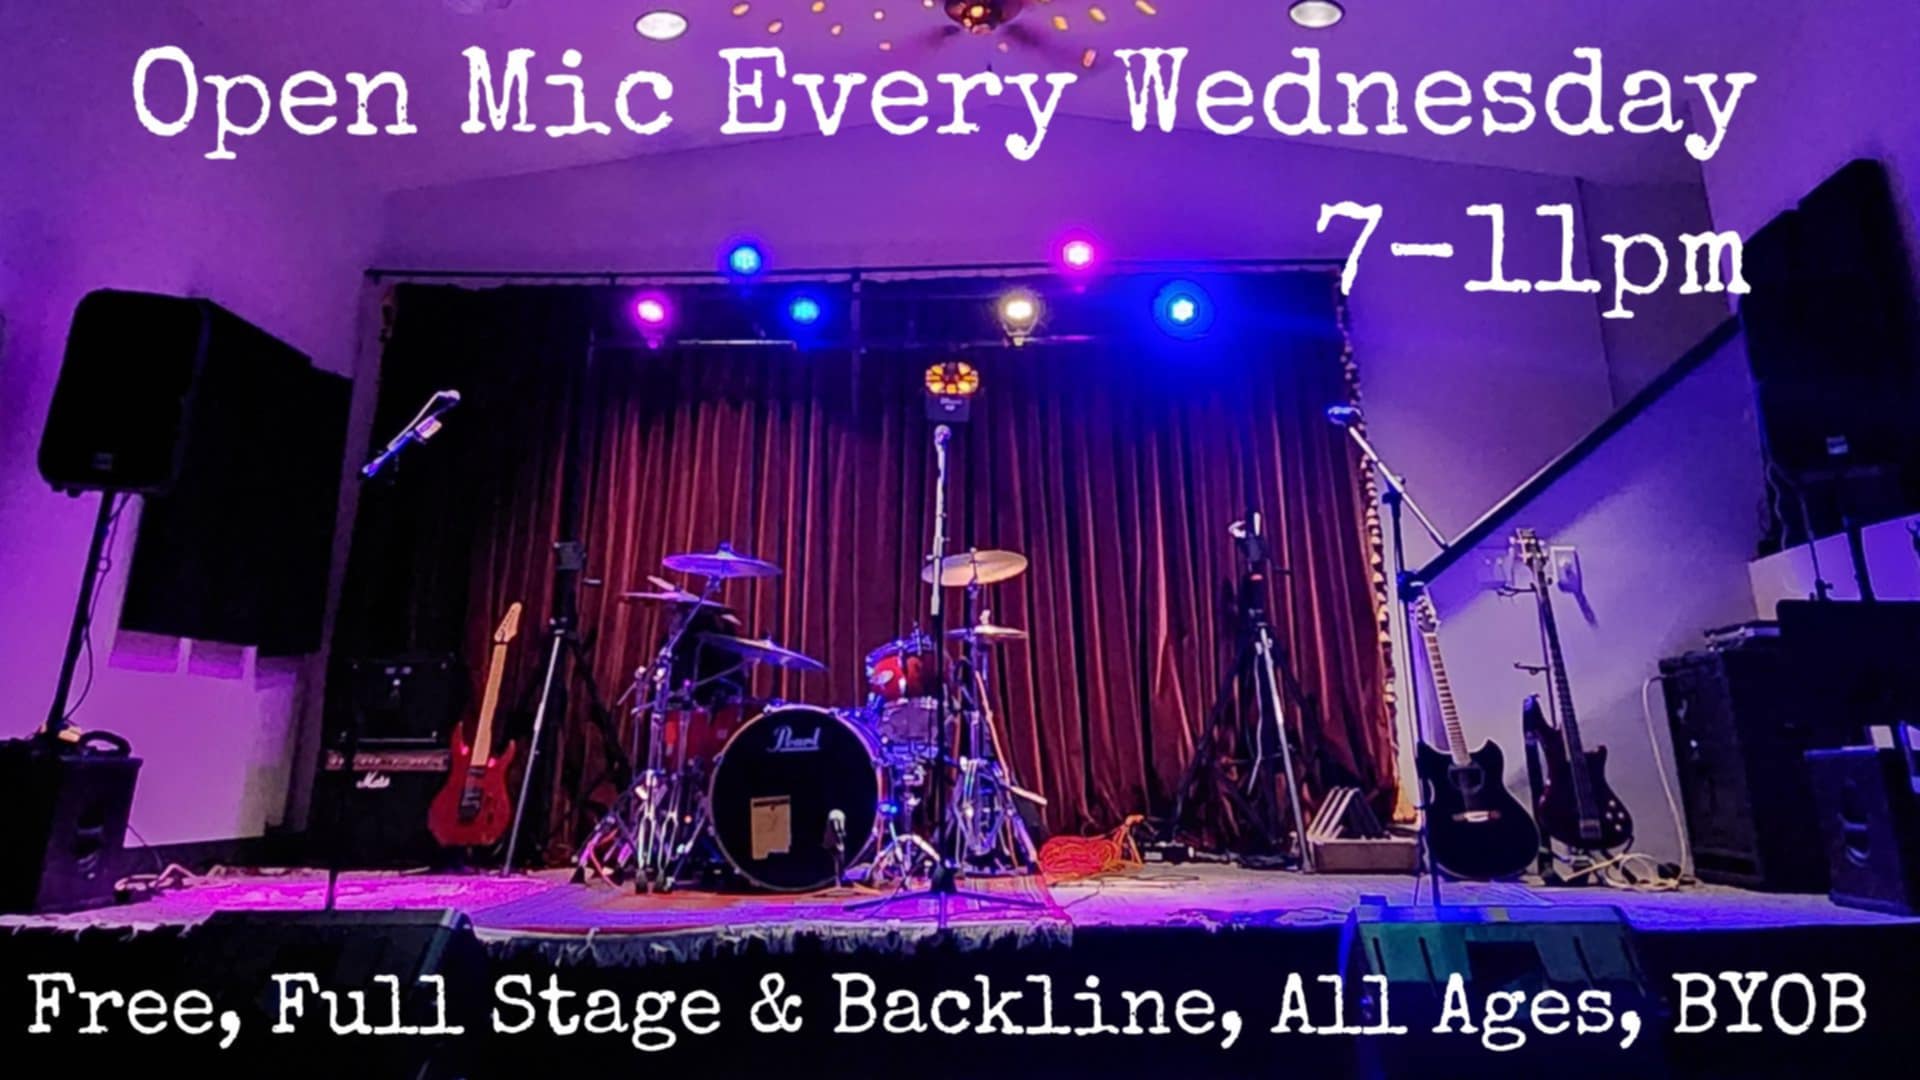 Open Mic every Wednesday 7-11pm